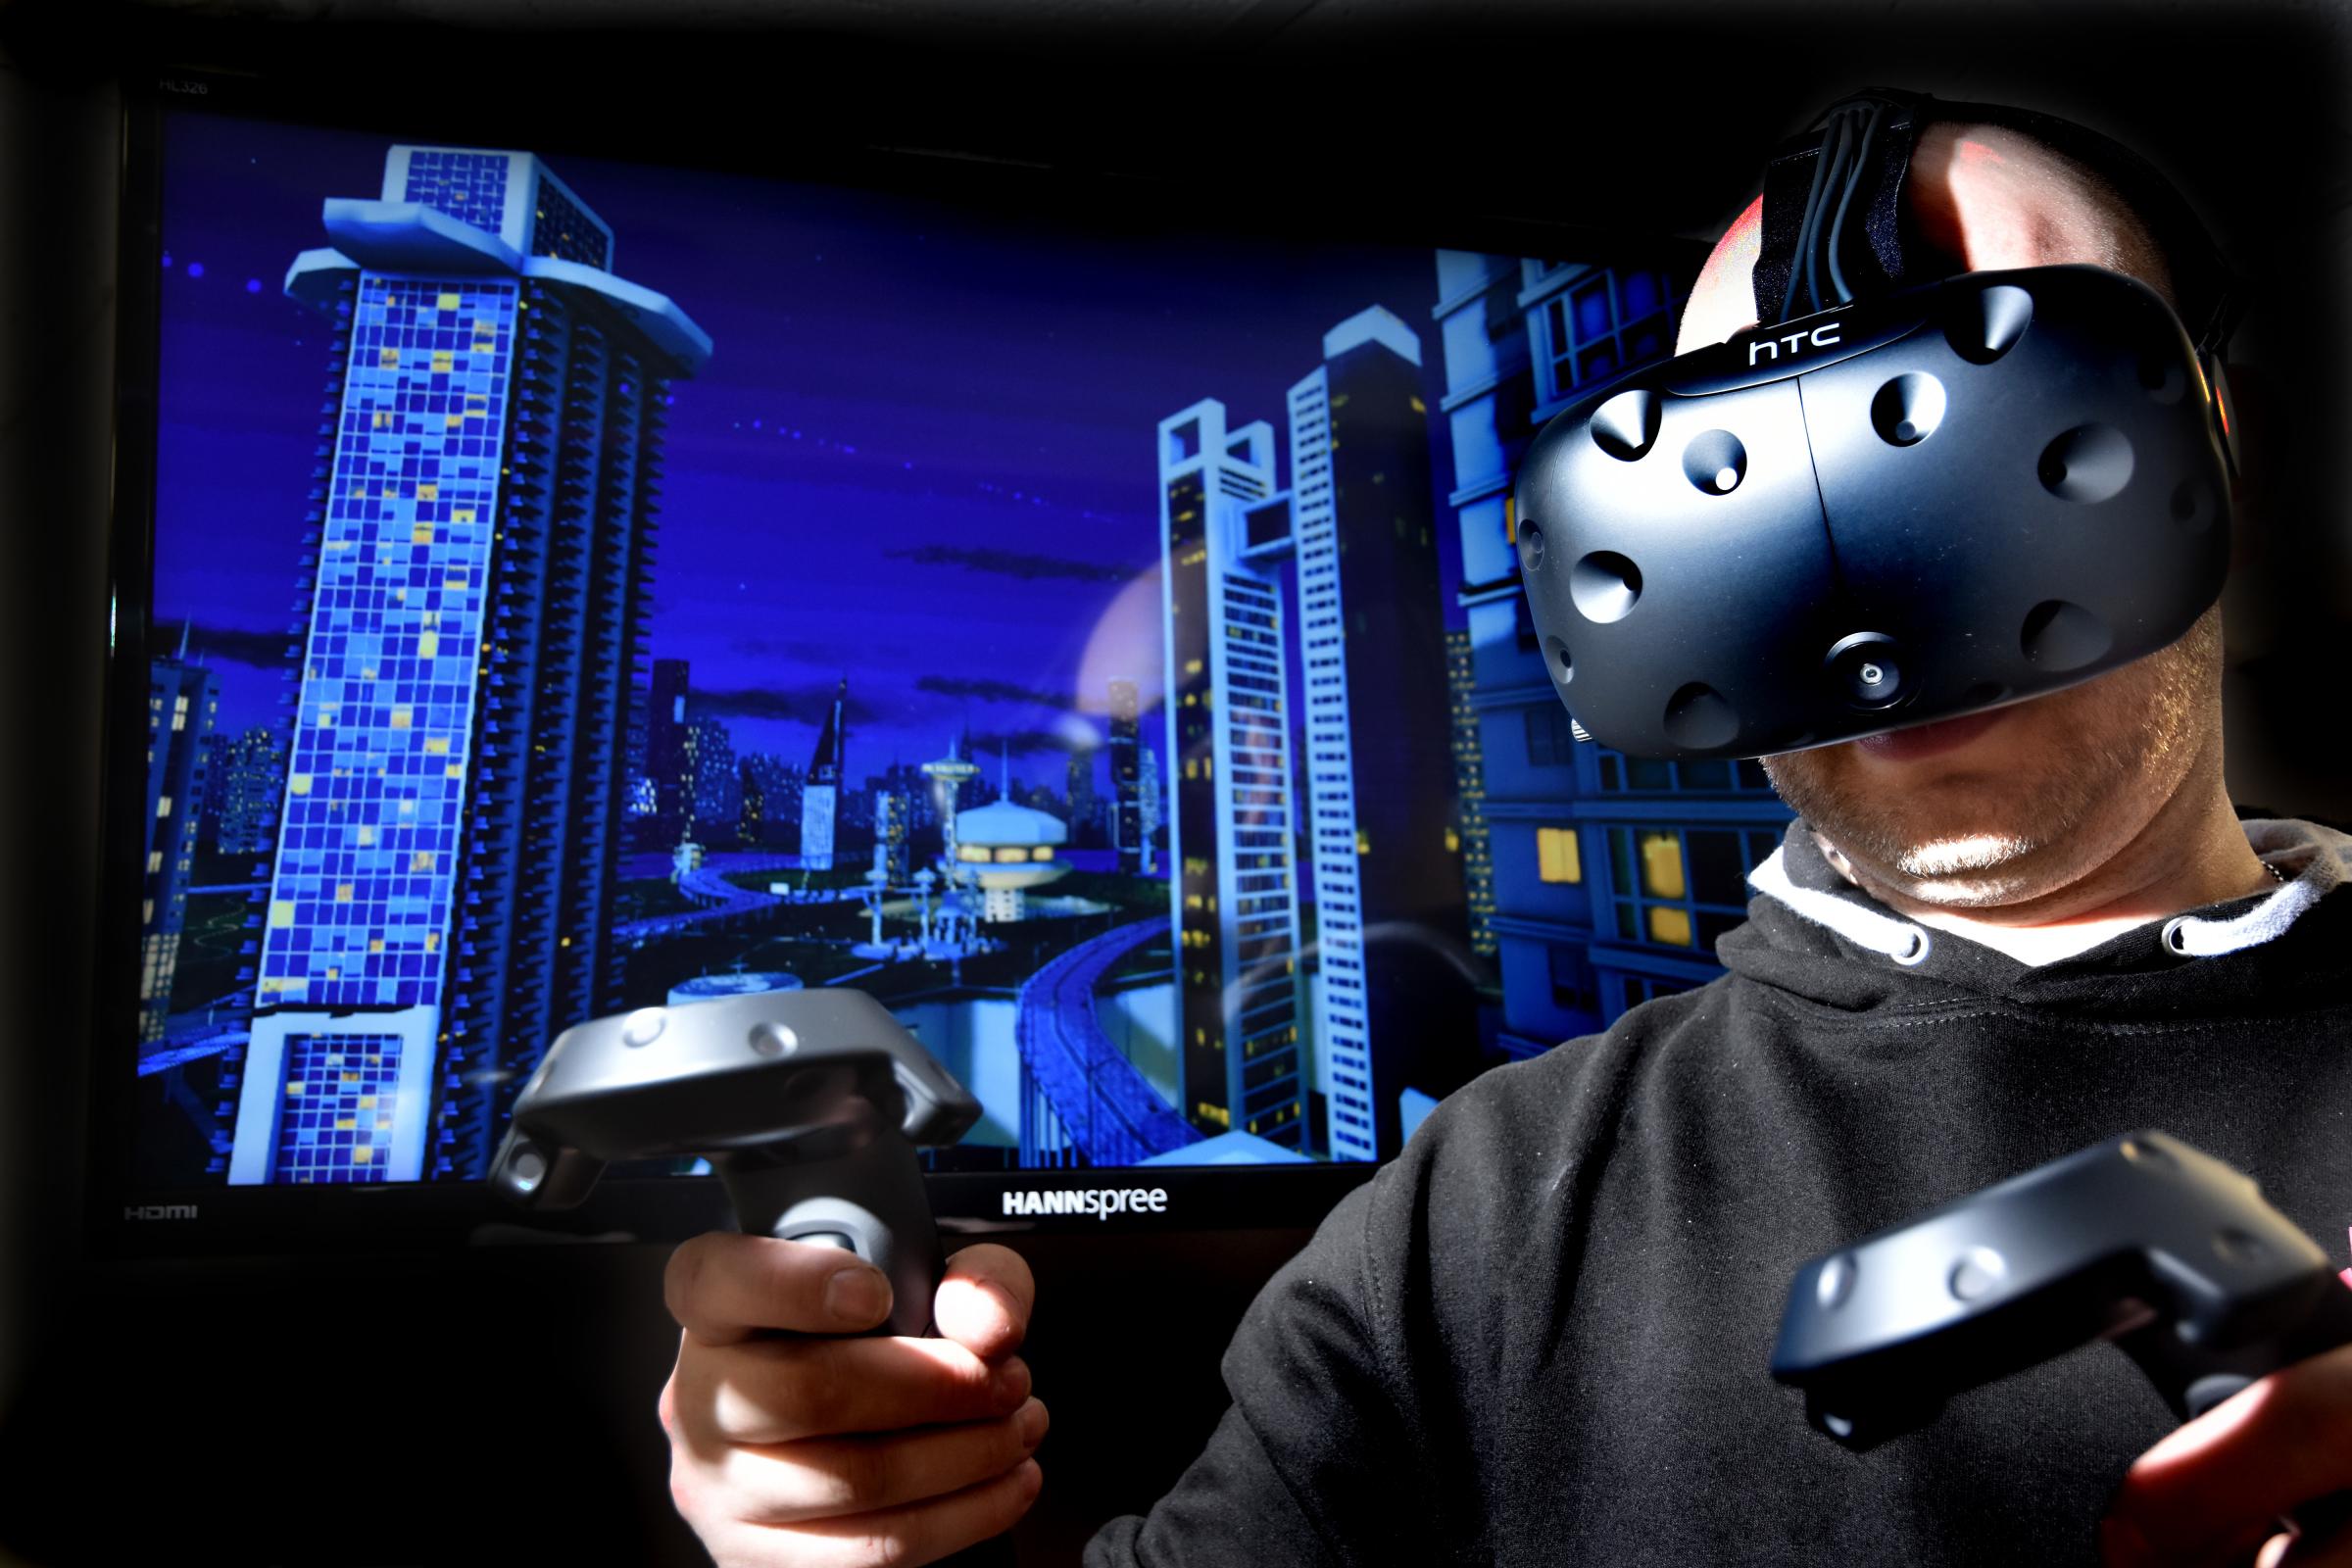 York's first virtual reality arcade opens in Acomb